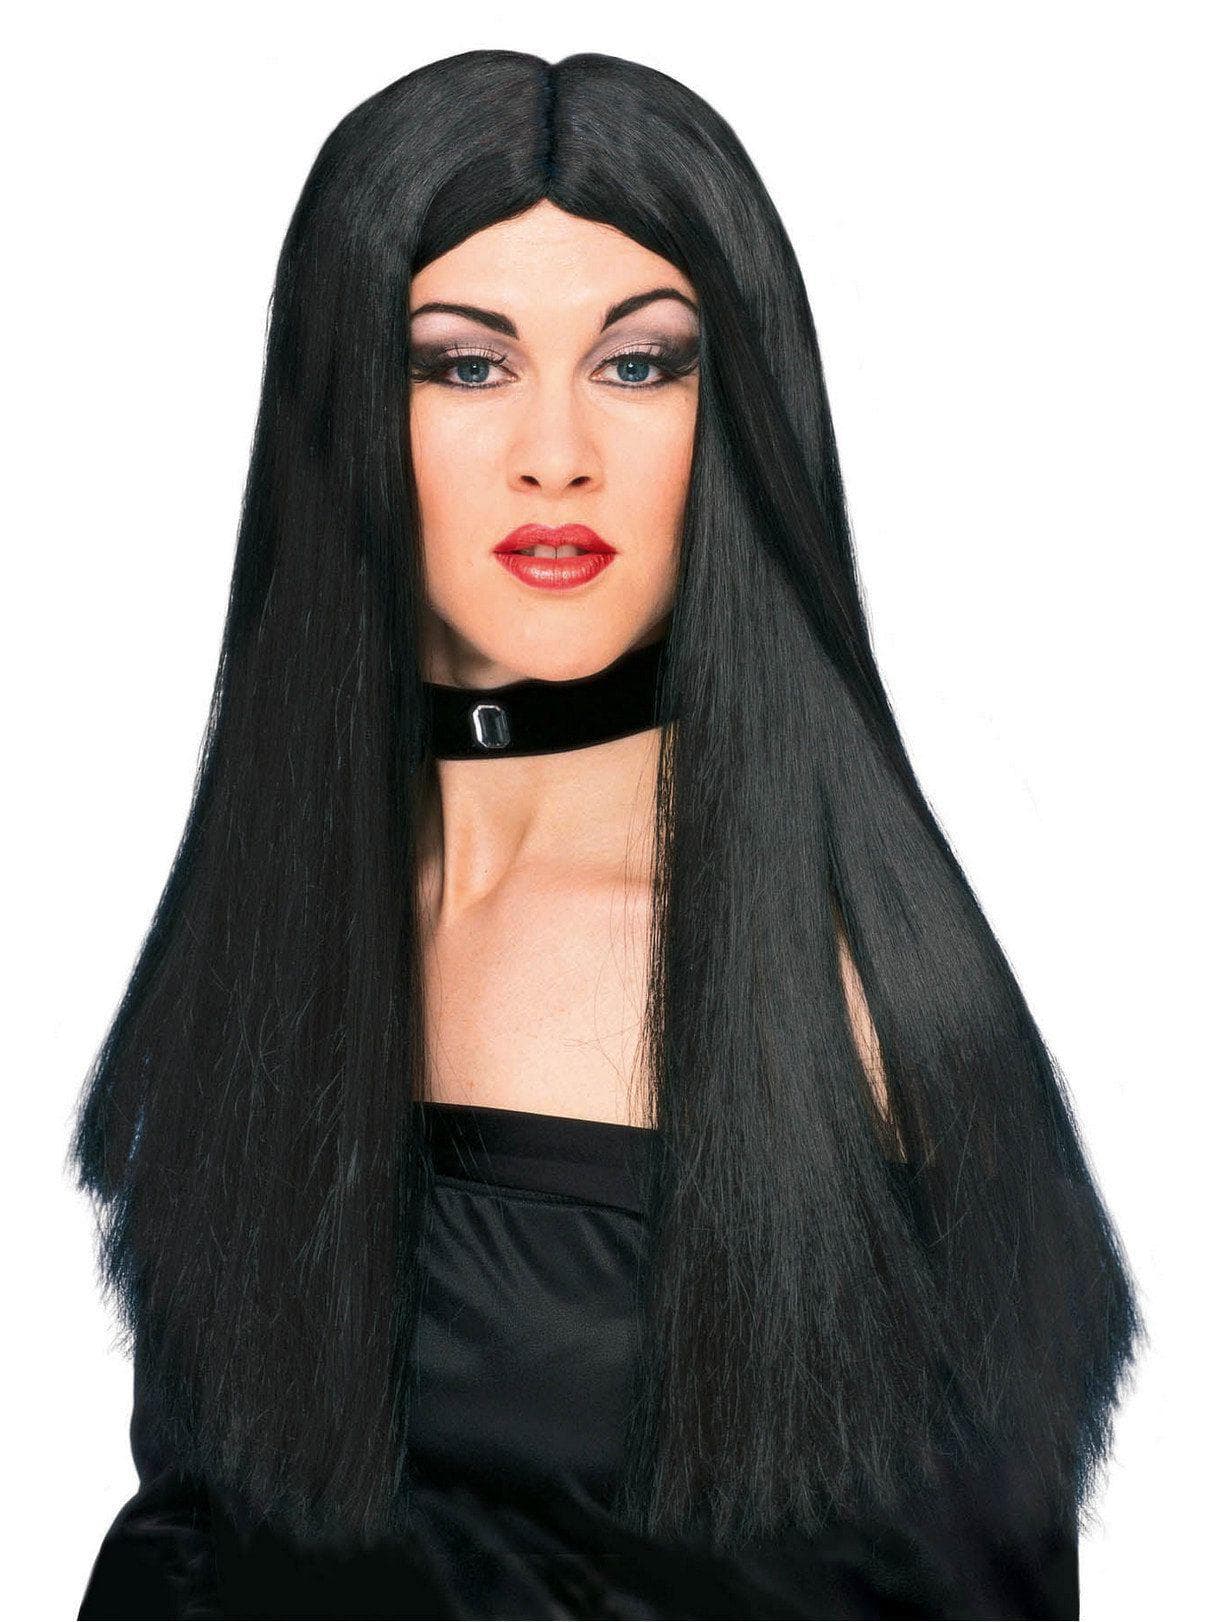 Women's Long Black 24-inch Witch Wig - costumes.com